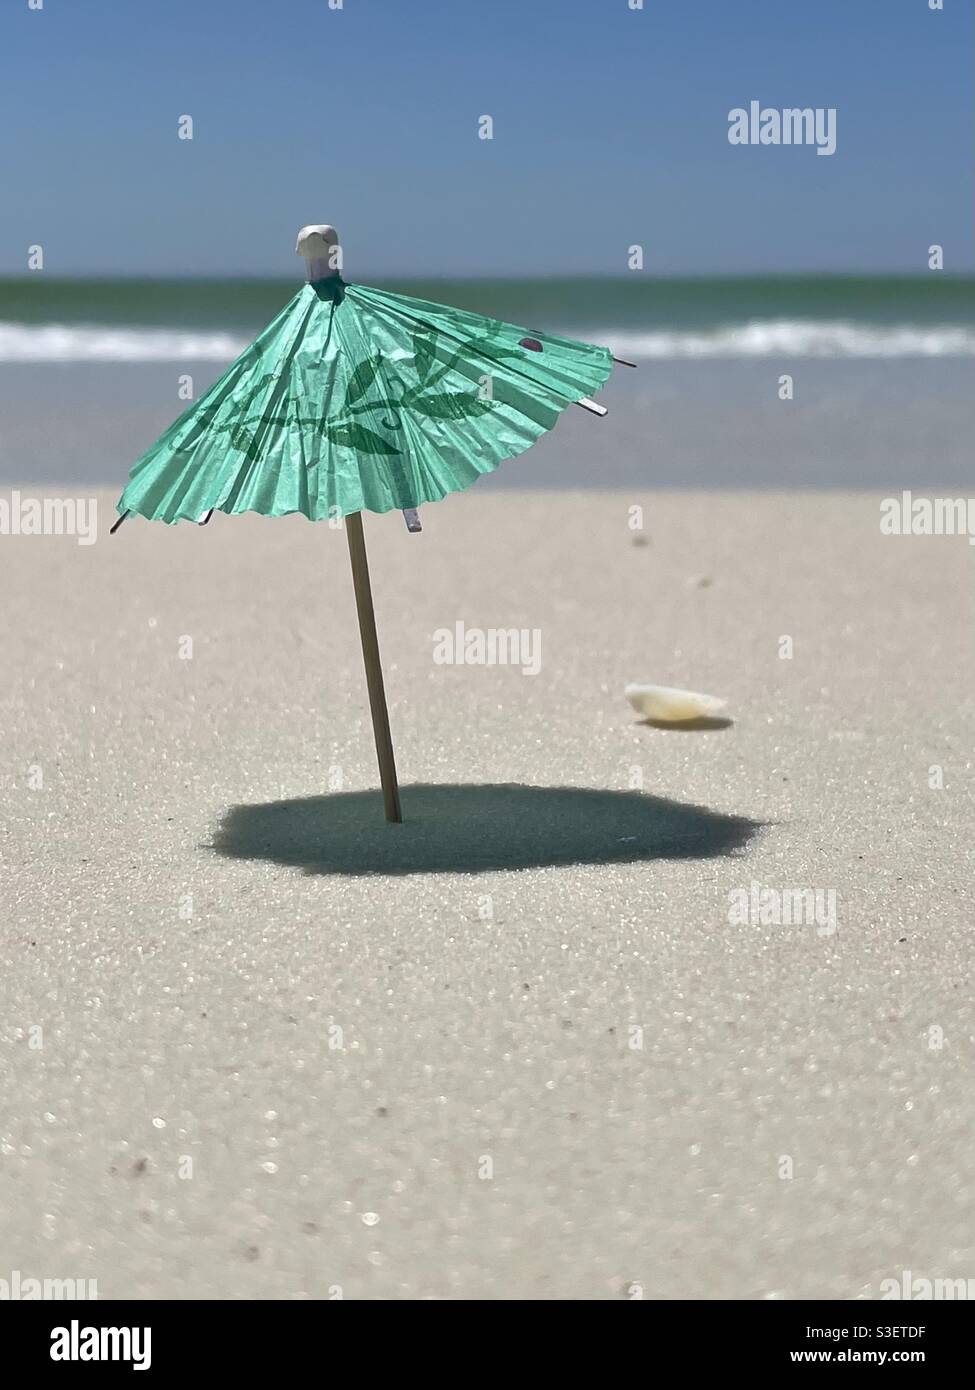 Select focus on miniature green umbrella with blurred beach background Stock Photo